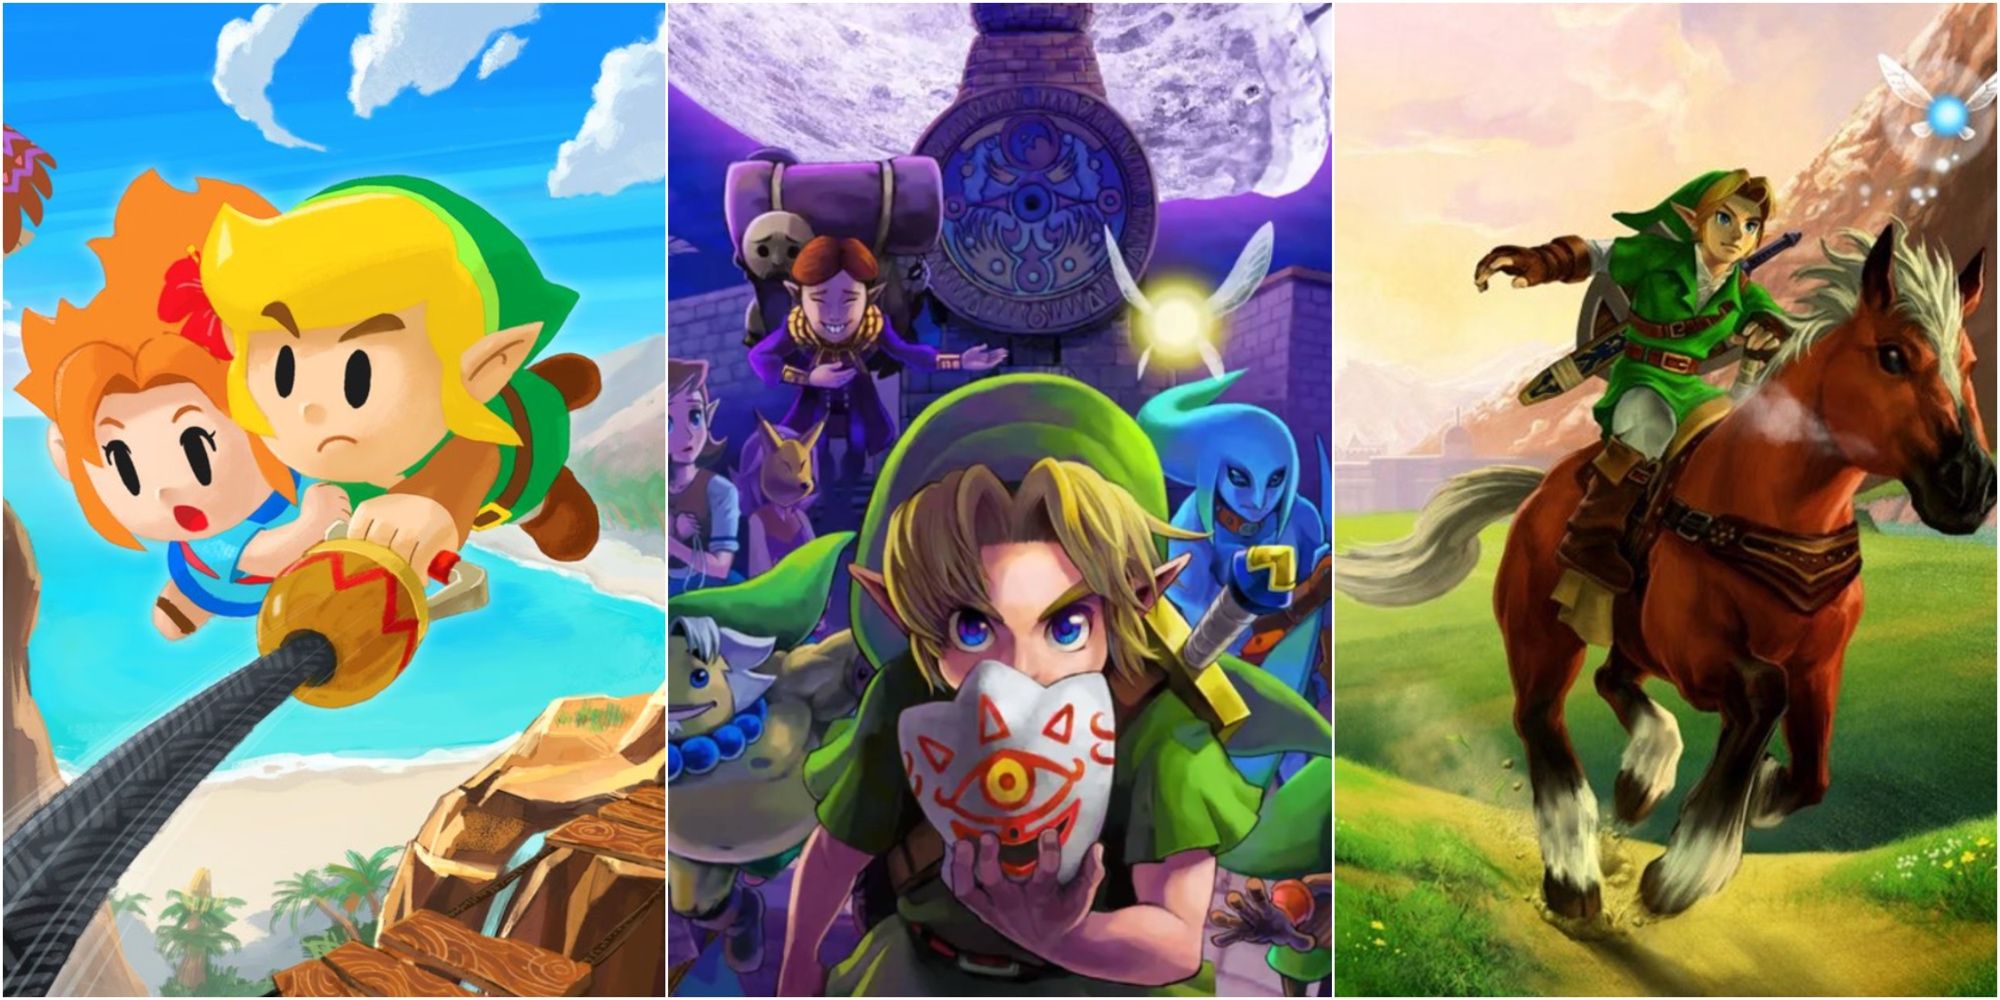 Link in Link's Awakening, Majora's Mask, and Ocarina Of Time